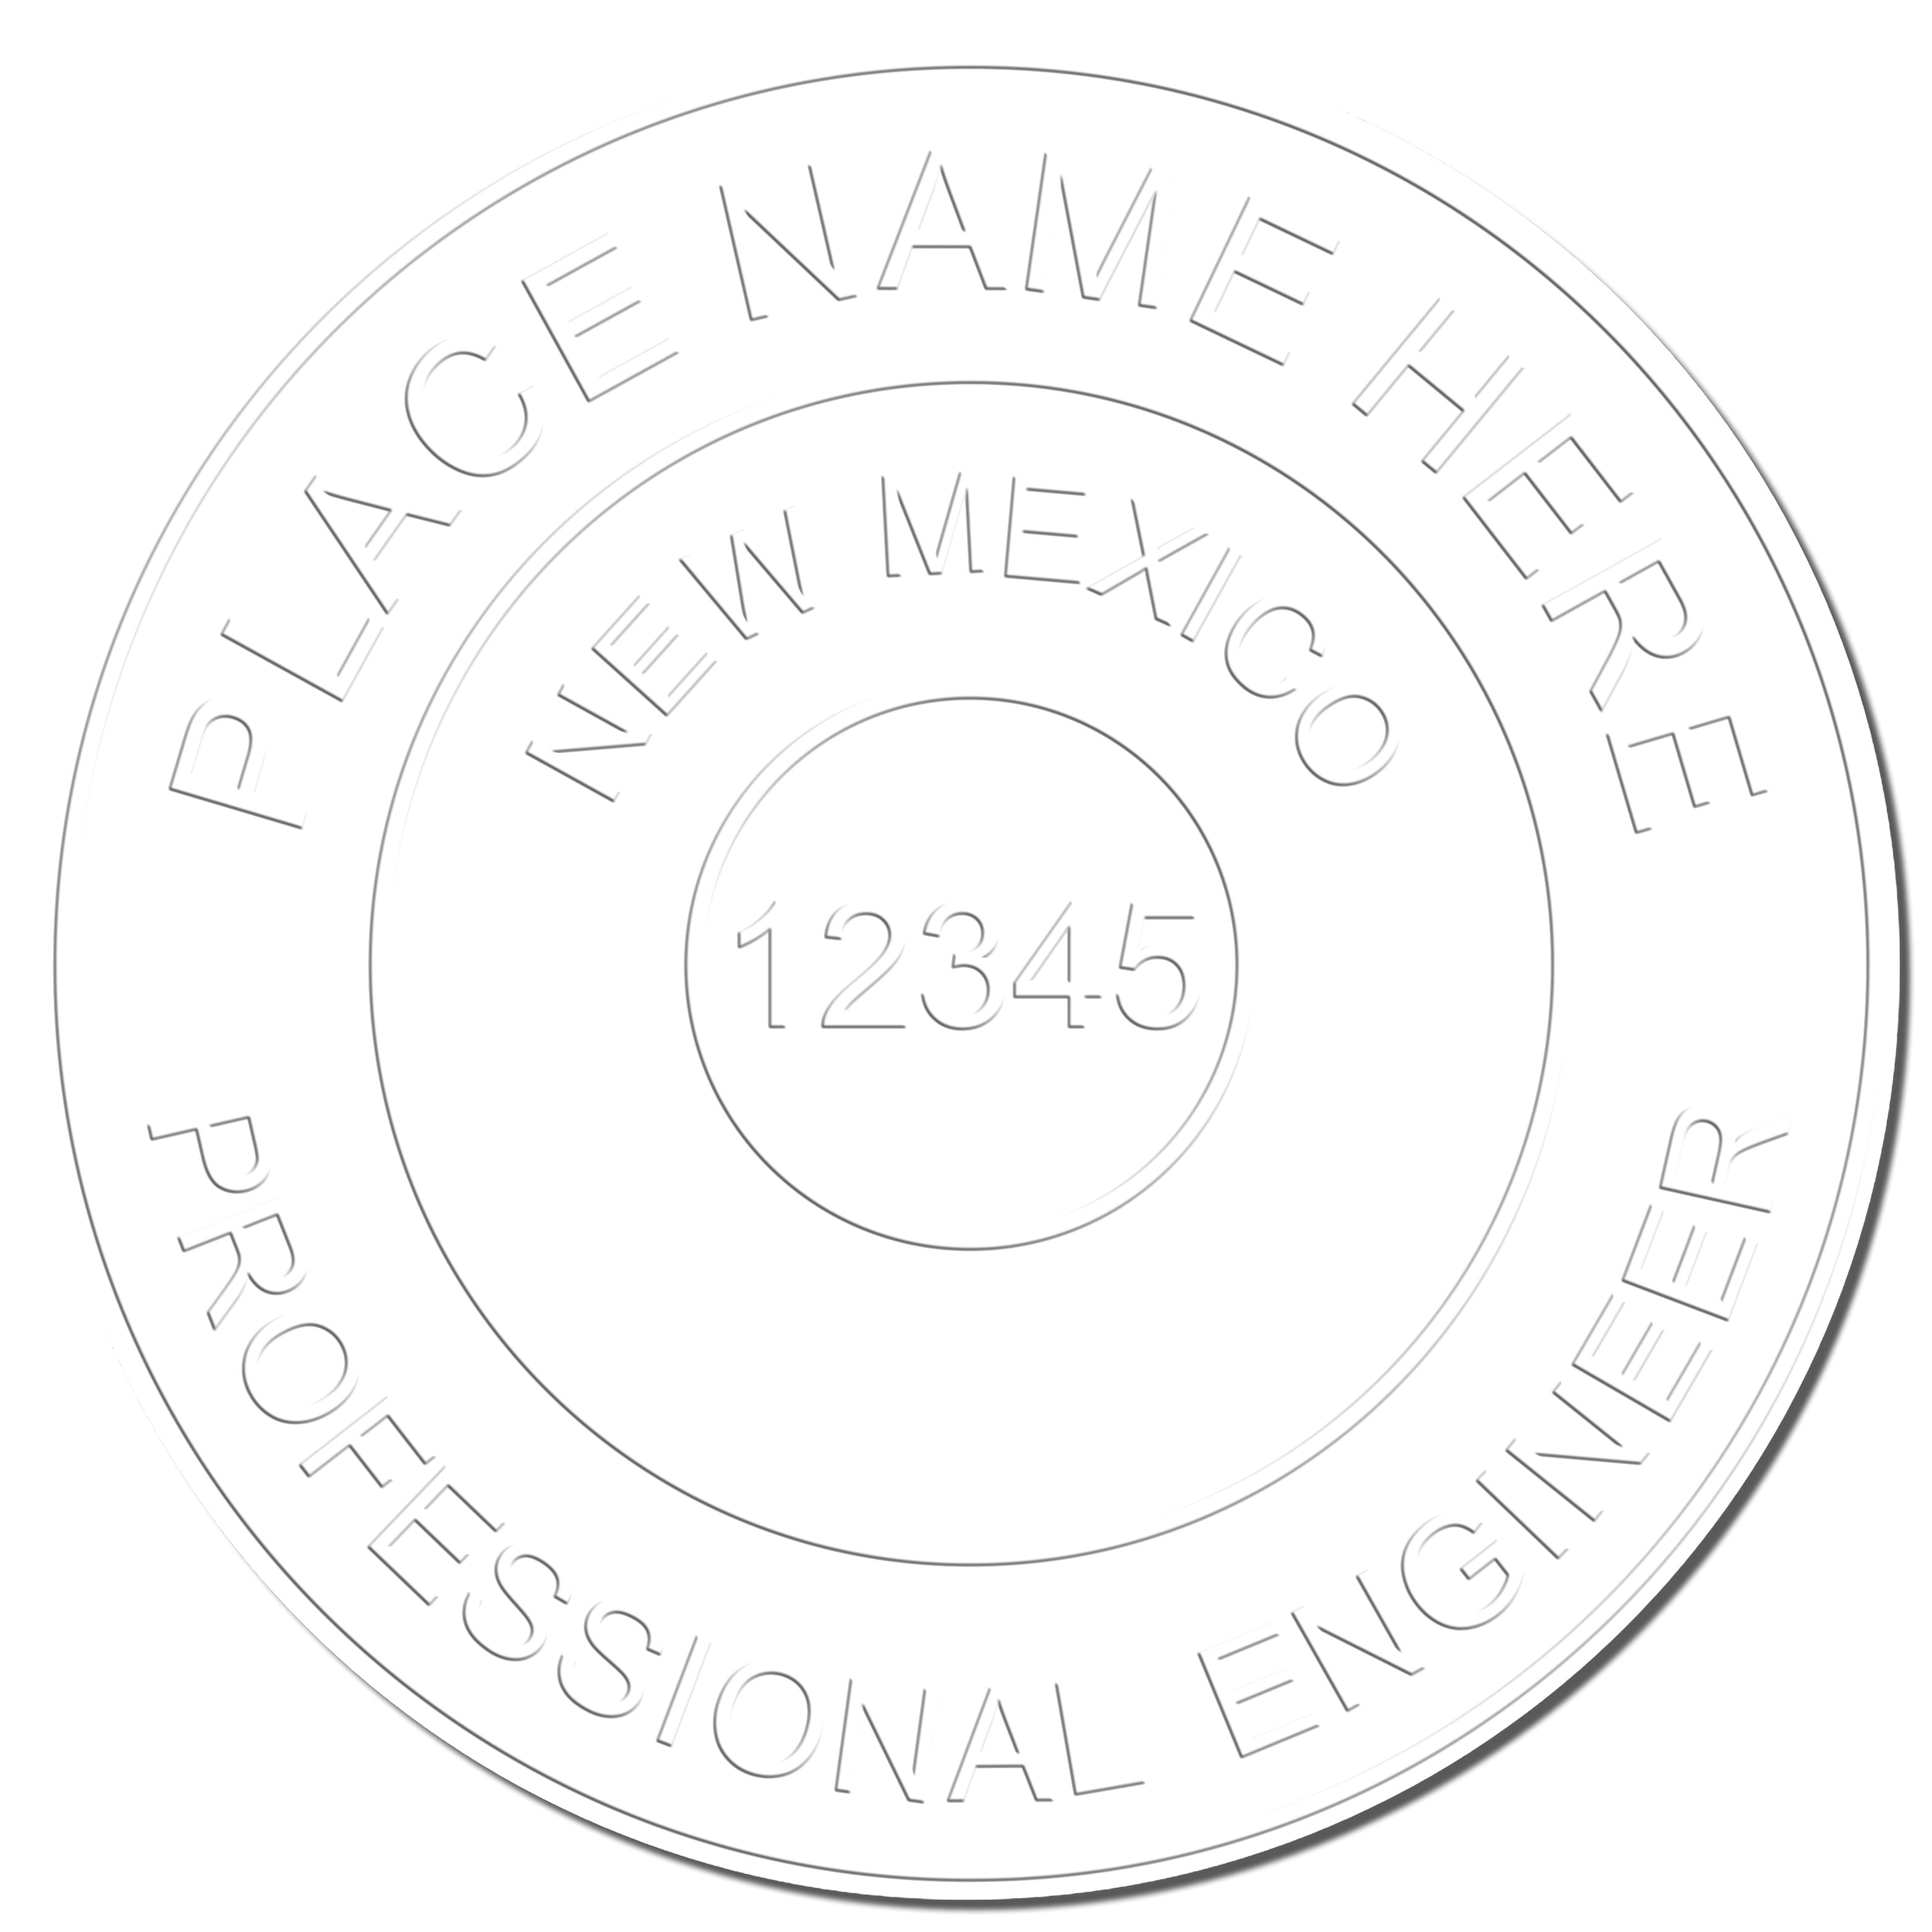 Another Example of a stamped impression of the New Mexico Engineer Desk Seal on a piece of office paper.